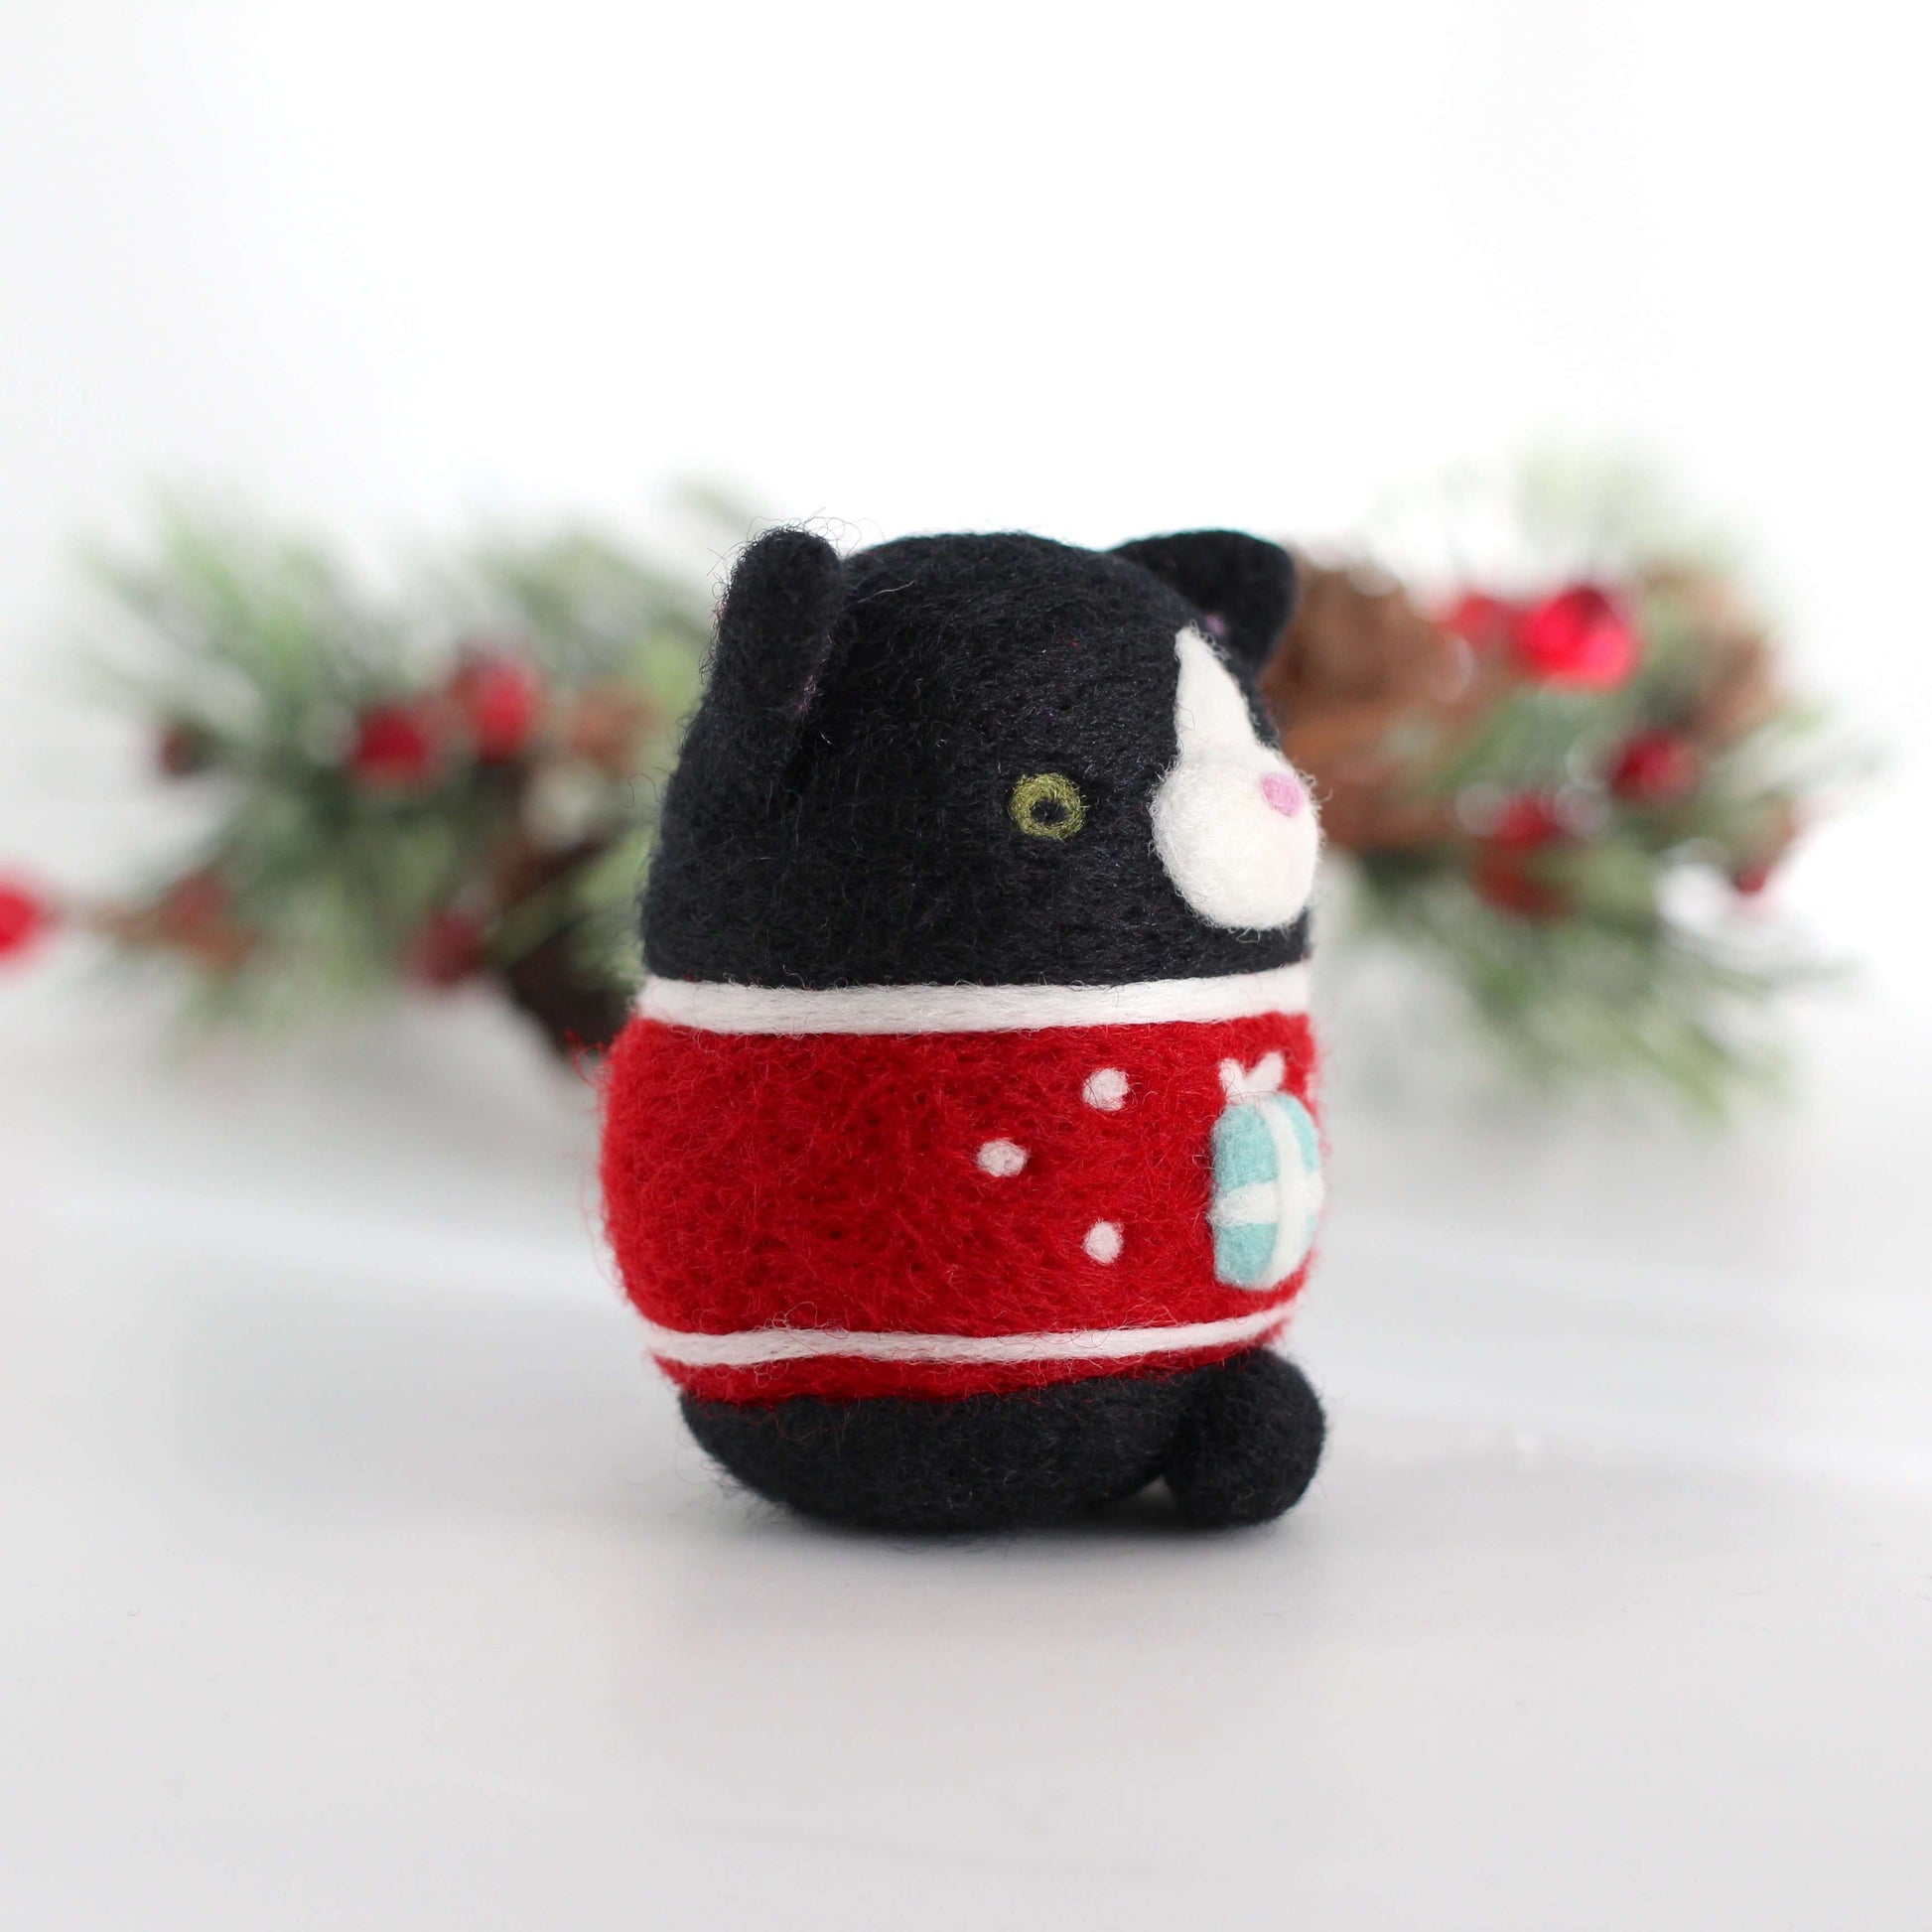 Needle Felted Tuxedo Cat in Gift Box Christmas Sweater by Wild Whimsy Woolies